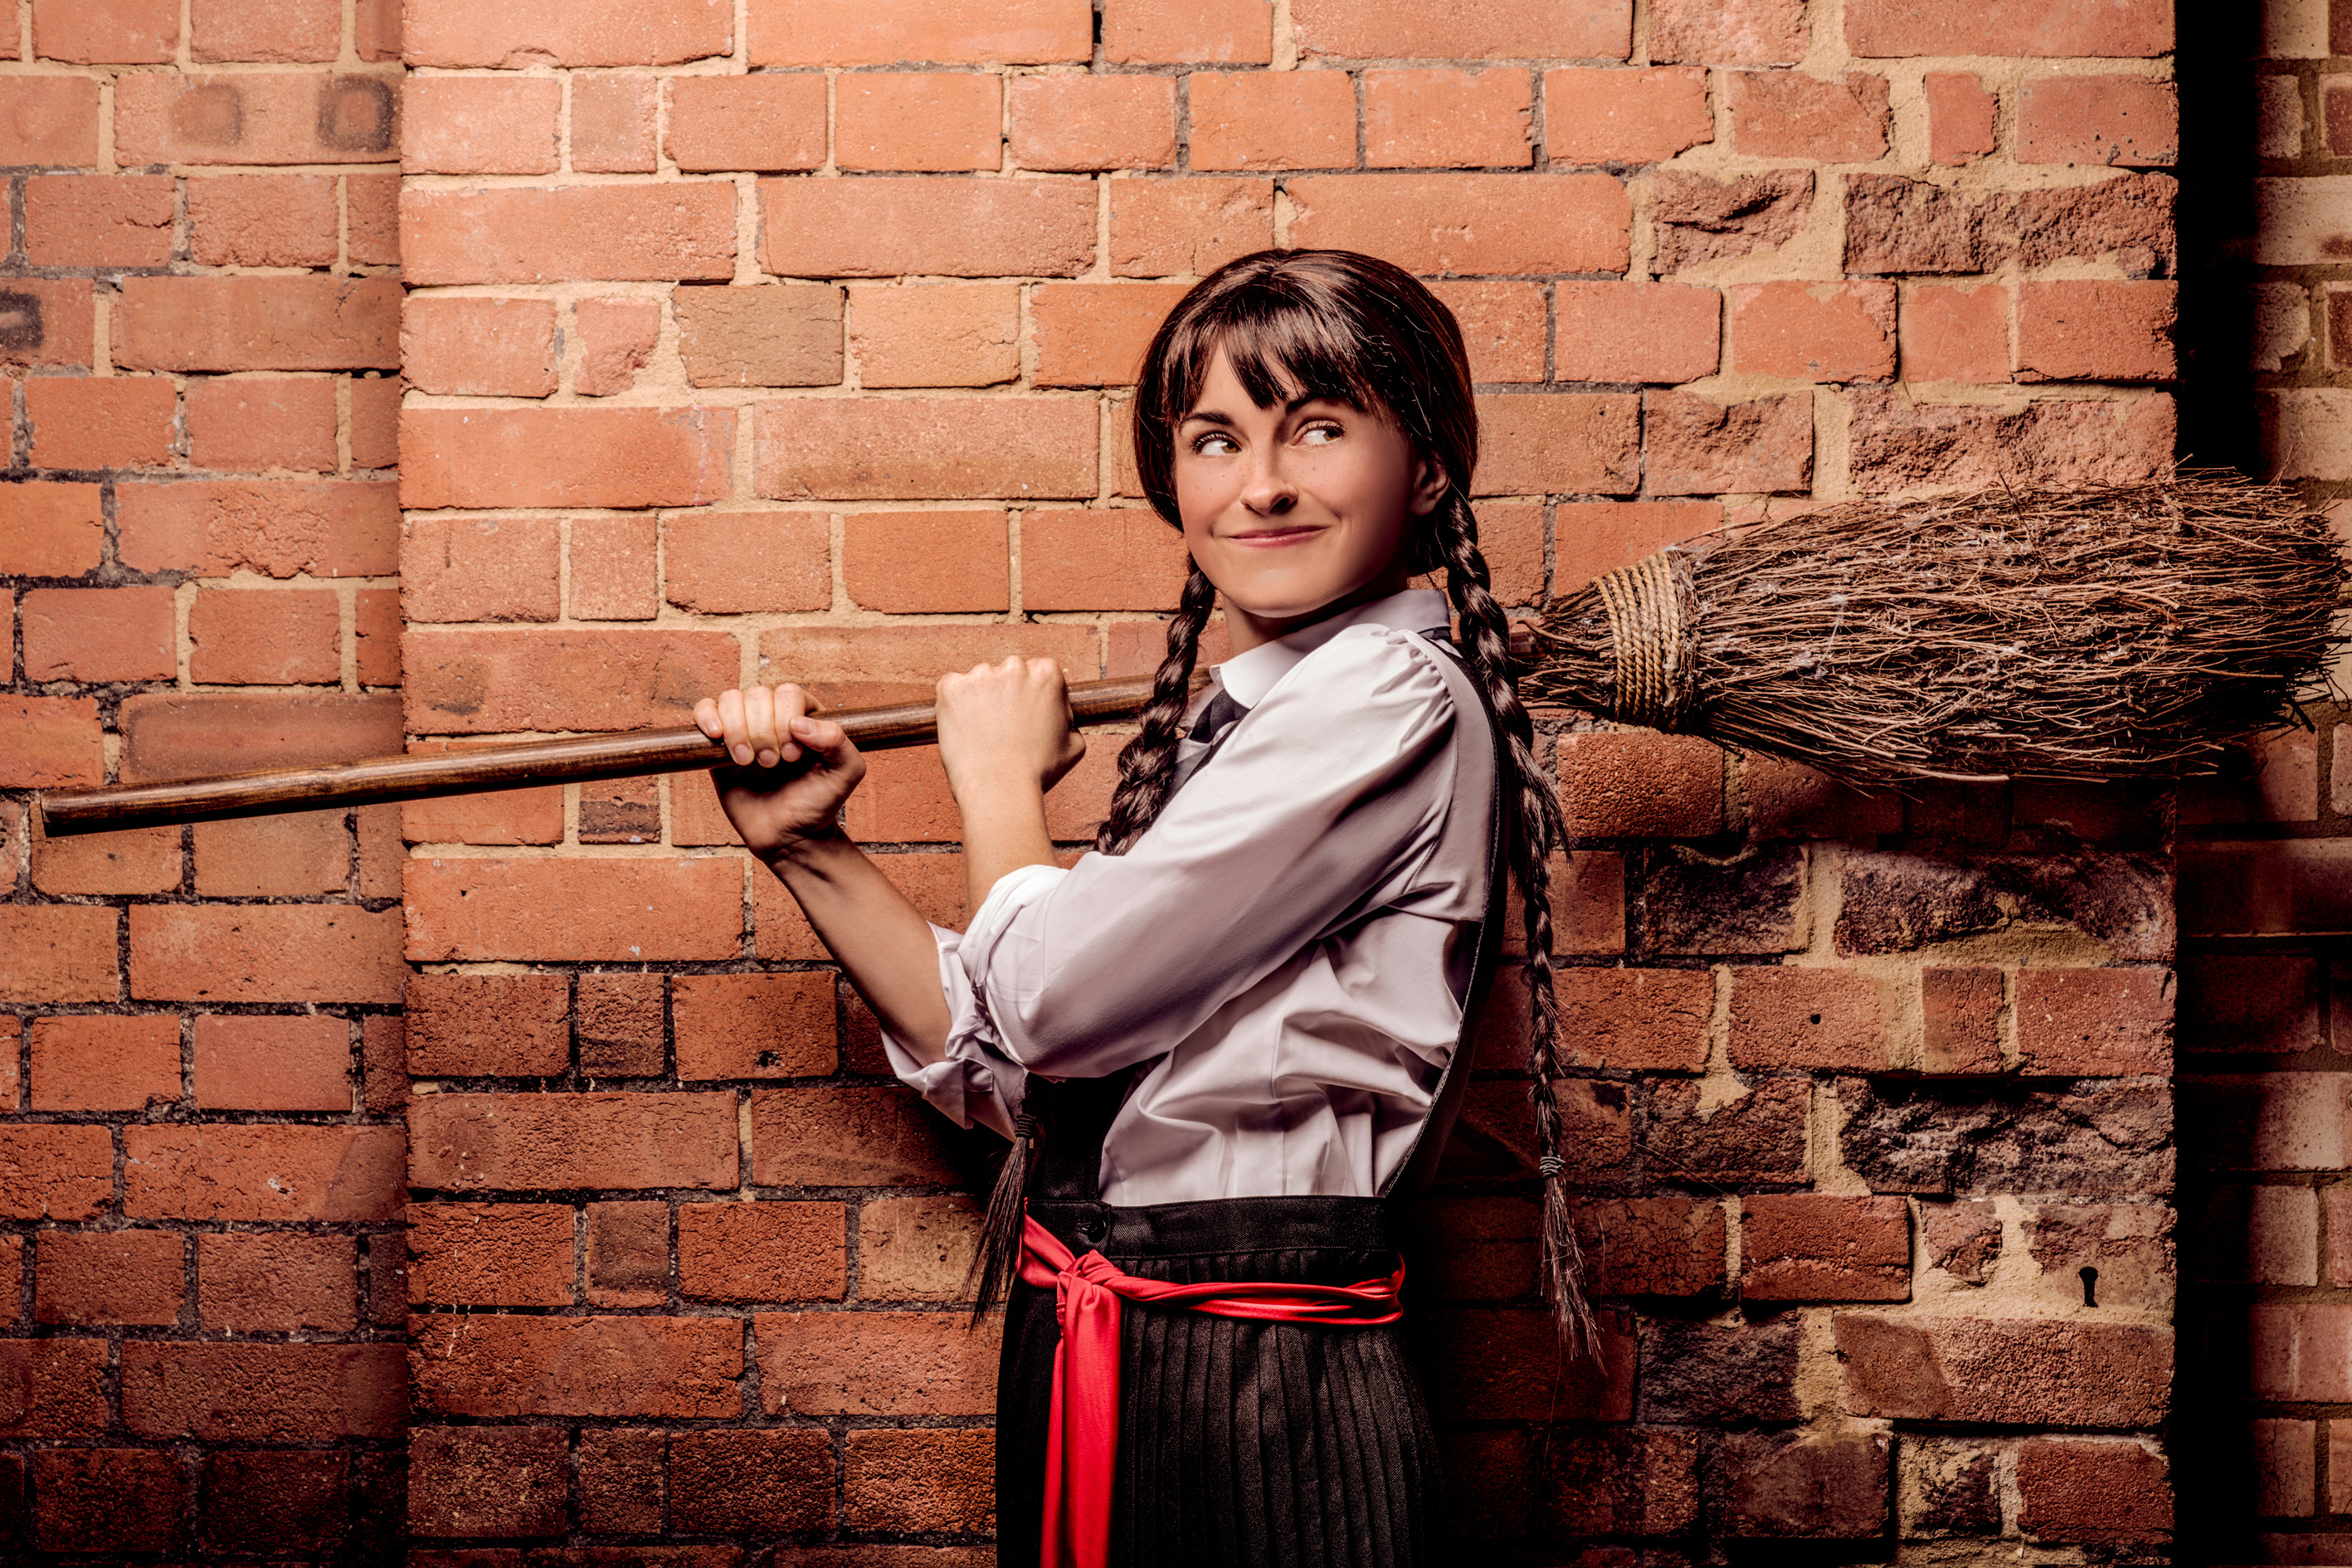 The Worst Witch at the Orchard Theater Dartford